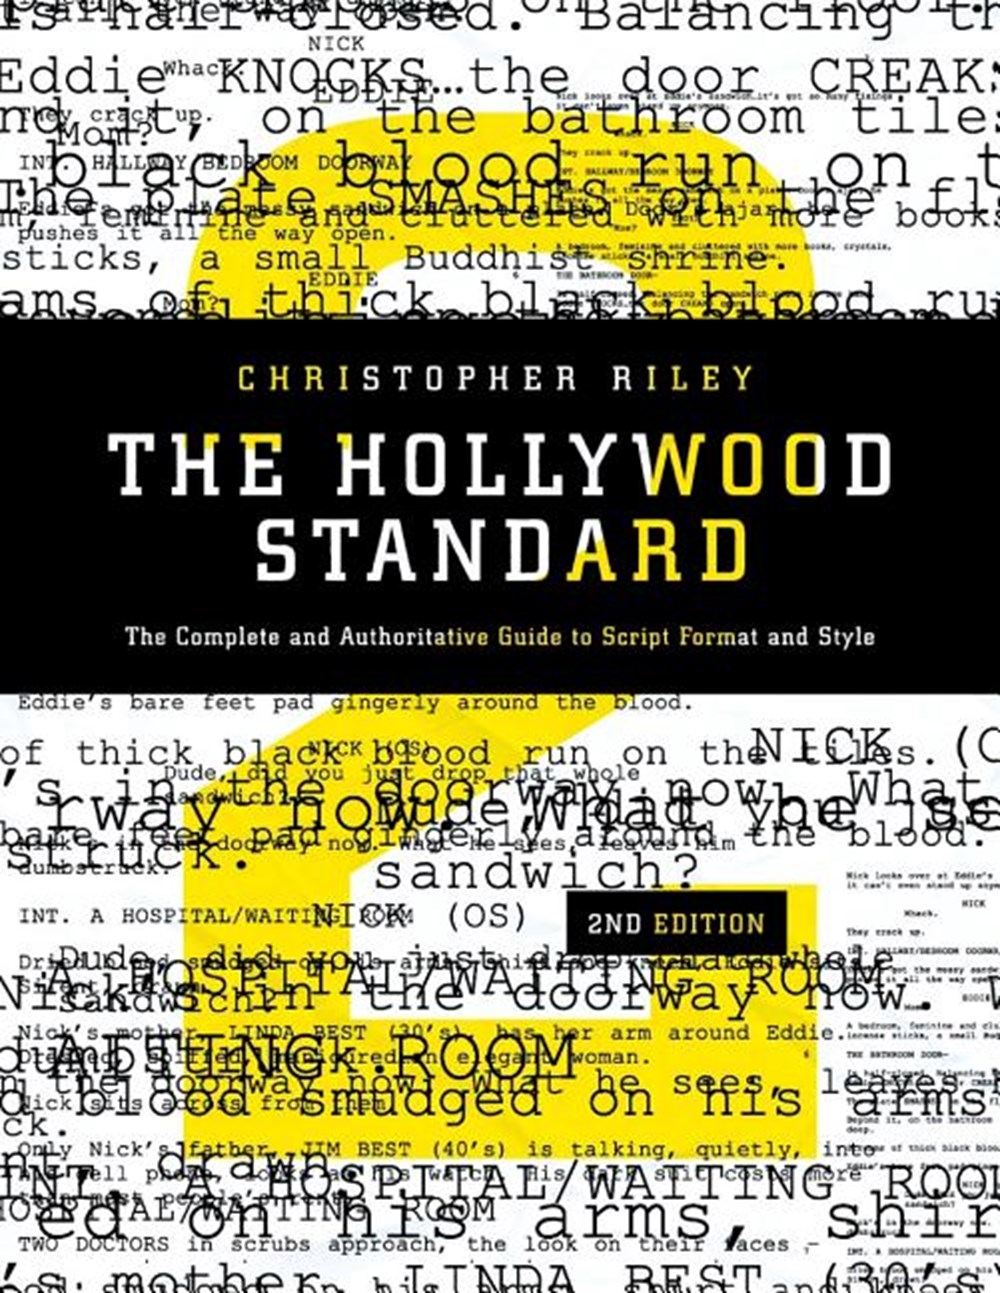 Hollywood Standard: The Complete and Authoritative Guide to Script Format and Style